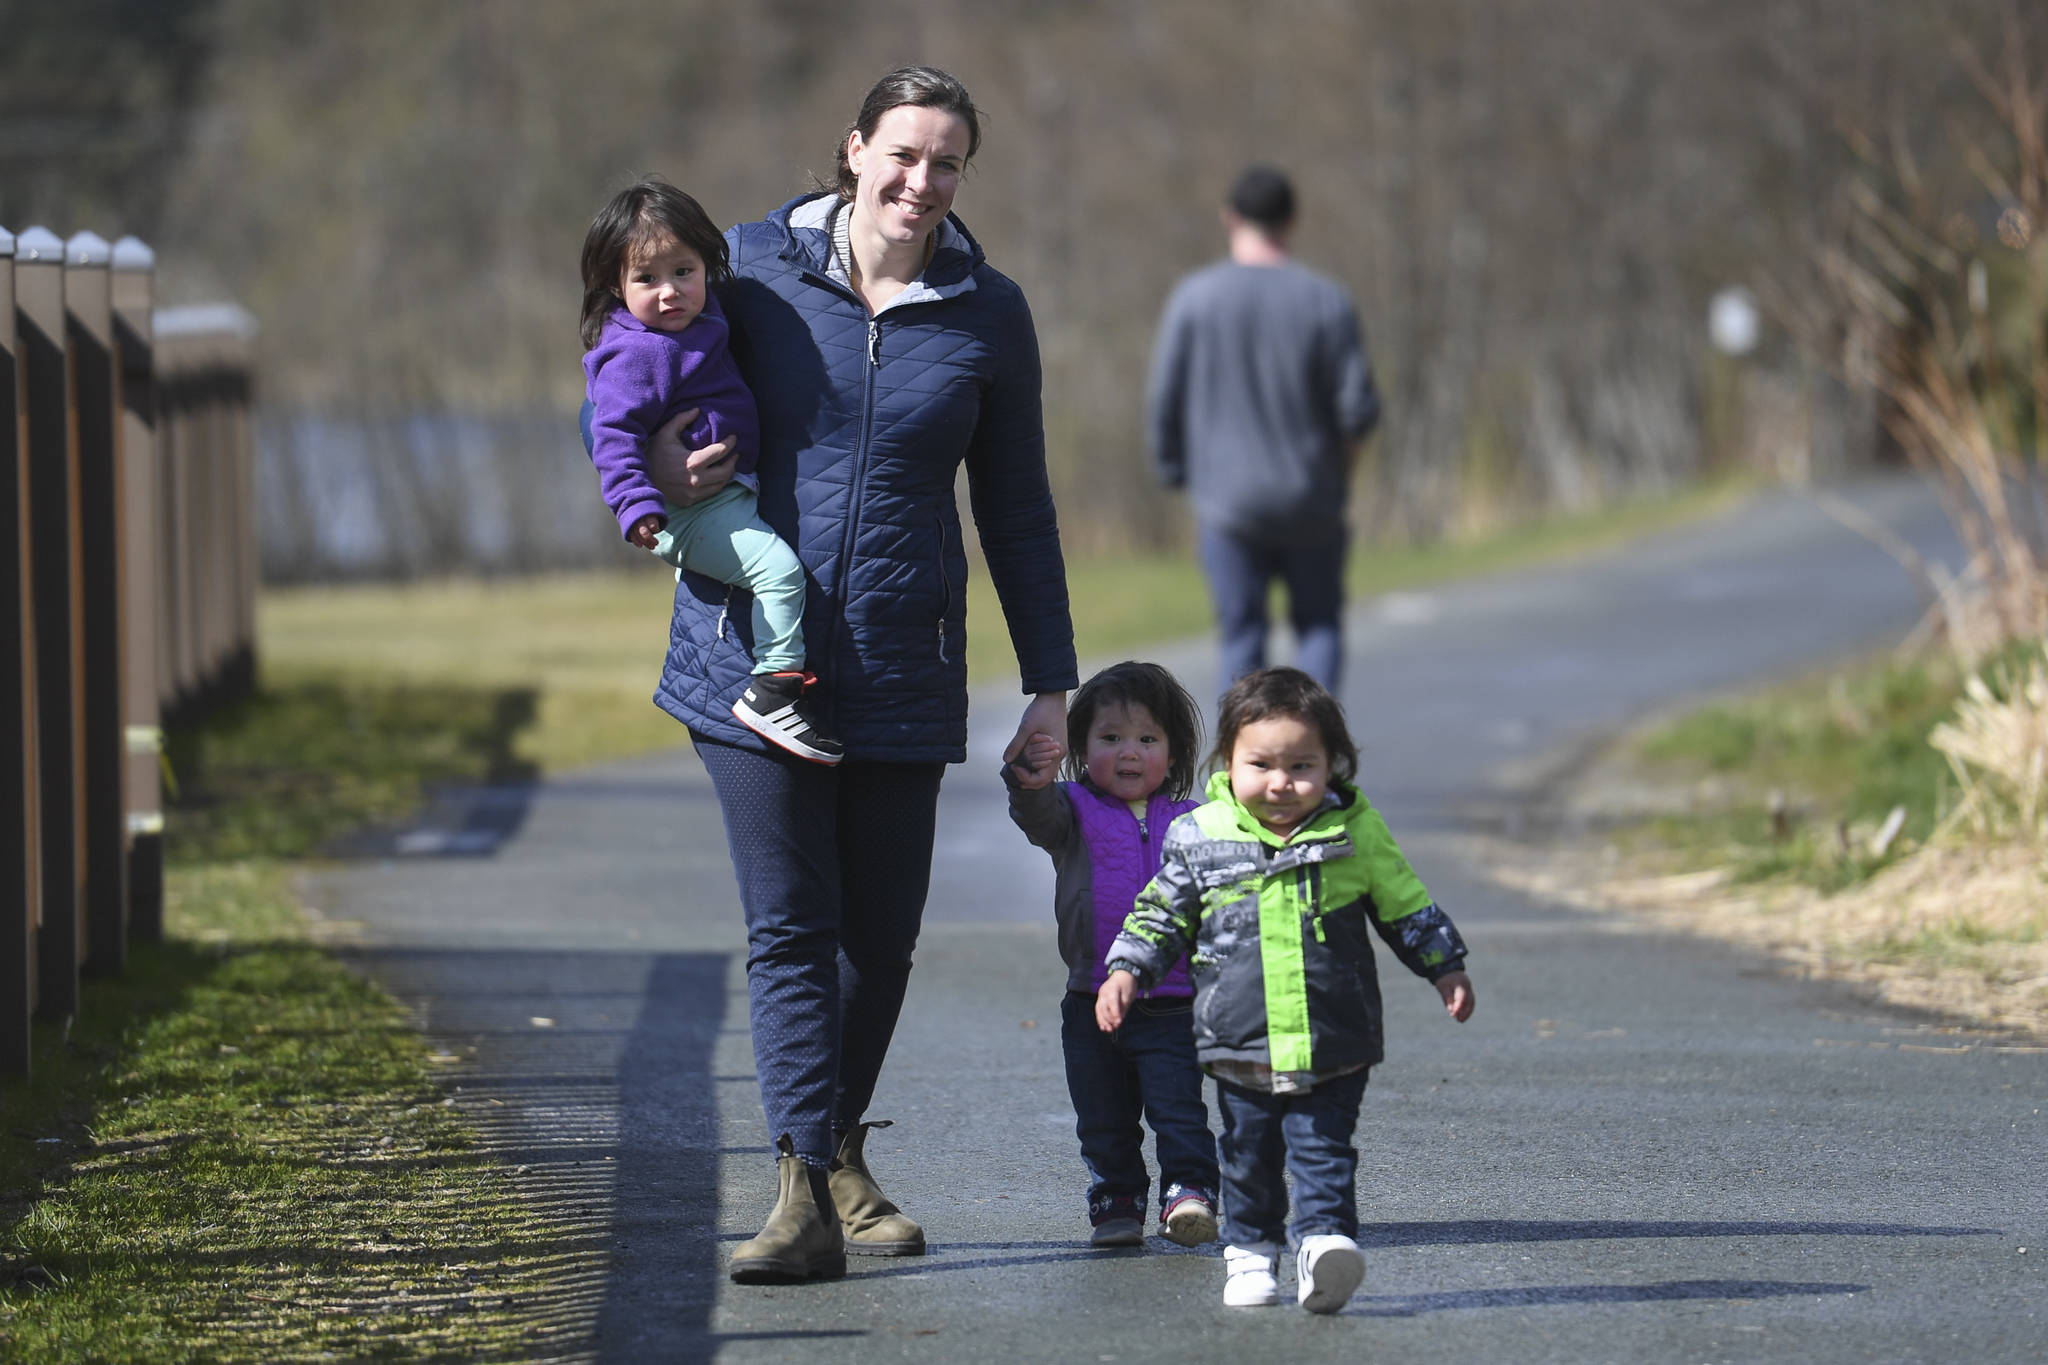 Shannon Fisher, executive director of Family Promise of Juneau, watches over the children of Steve and Mary Littlefield, Angeline, Maximus and Tiana, as the parents are interviewed about the program at Twin Lakes on Wednesday, April 24, 2019. (Michael Penn | Juneau Empire)